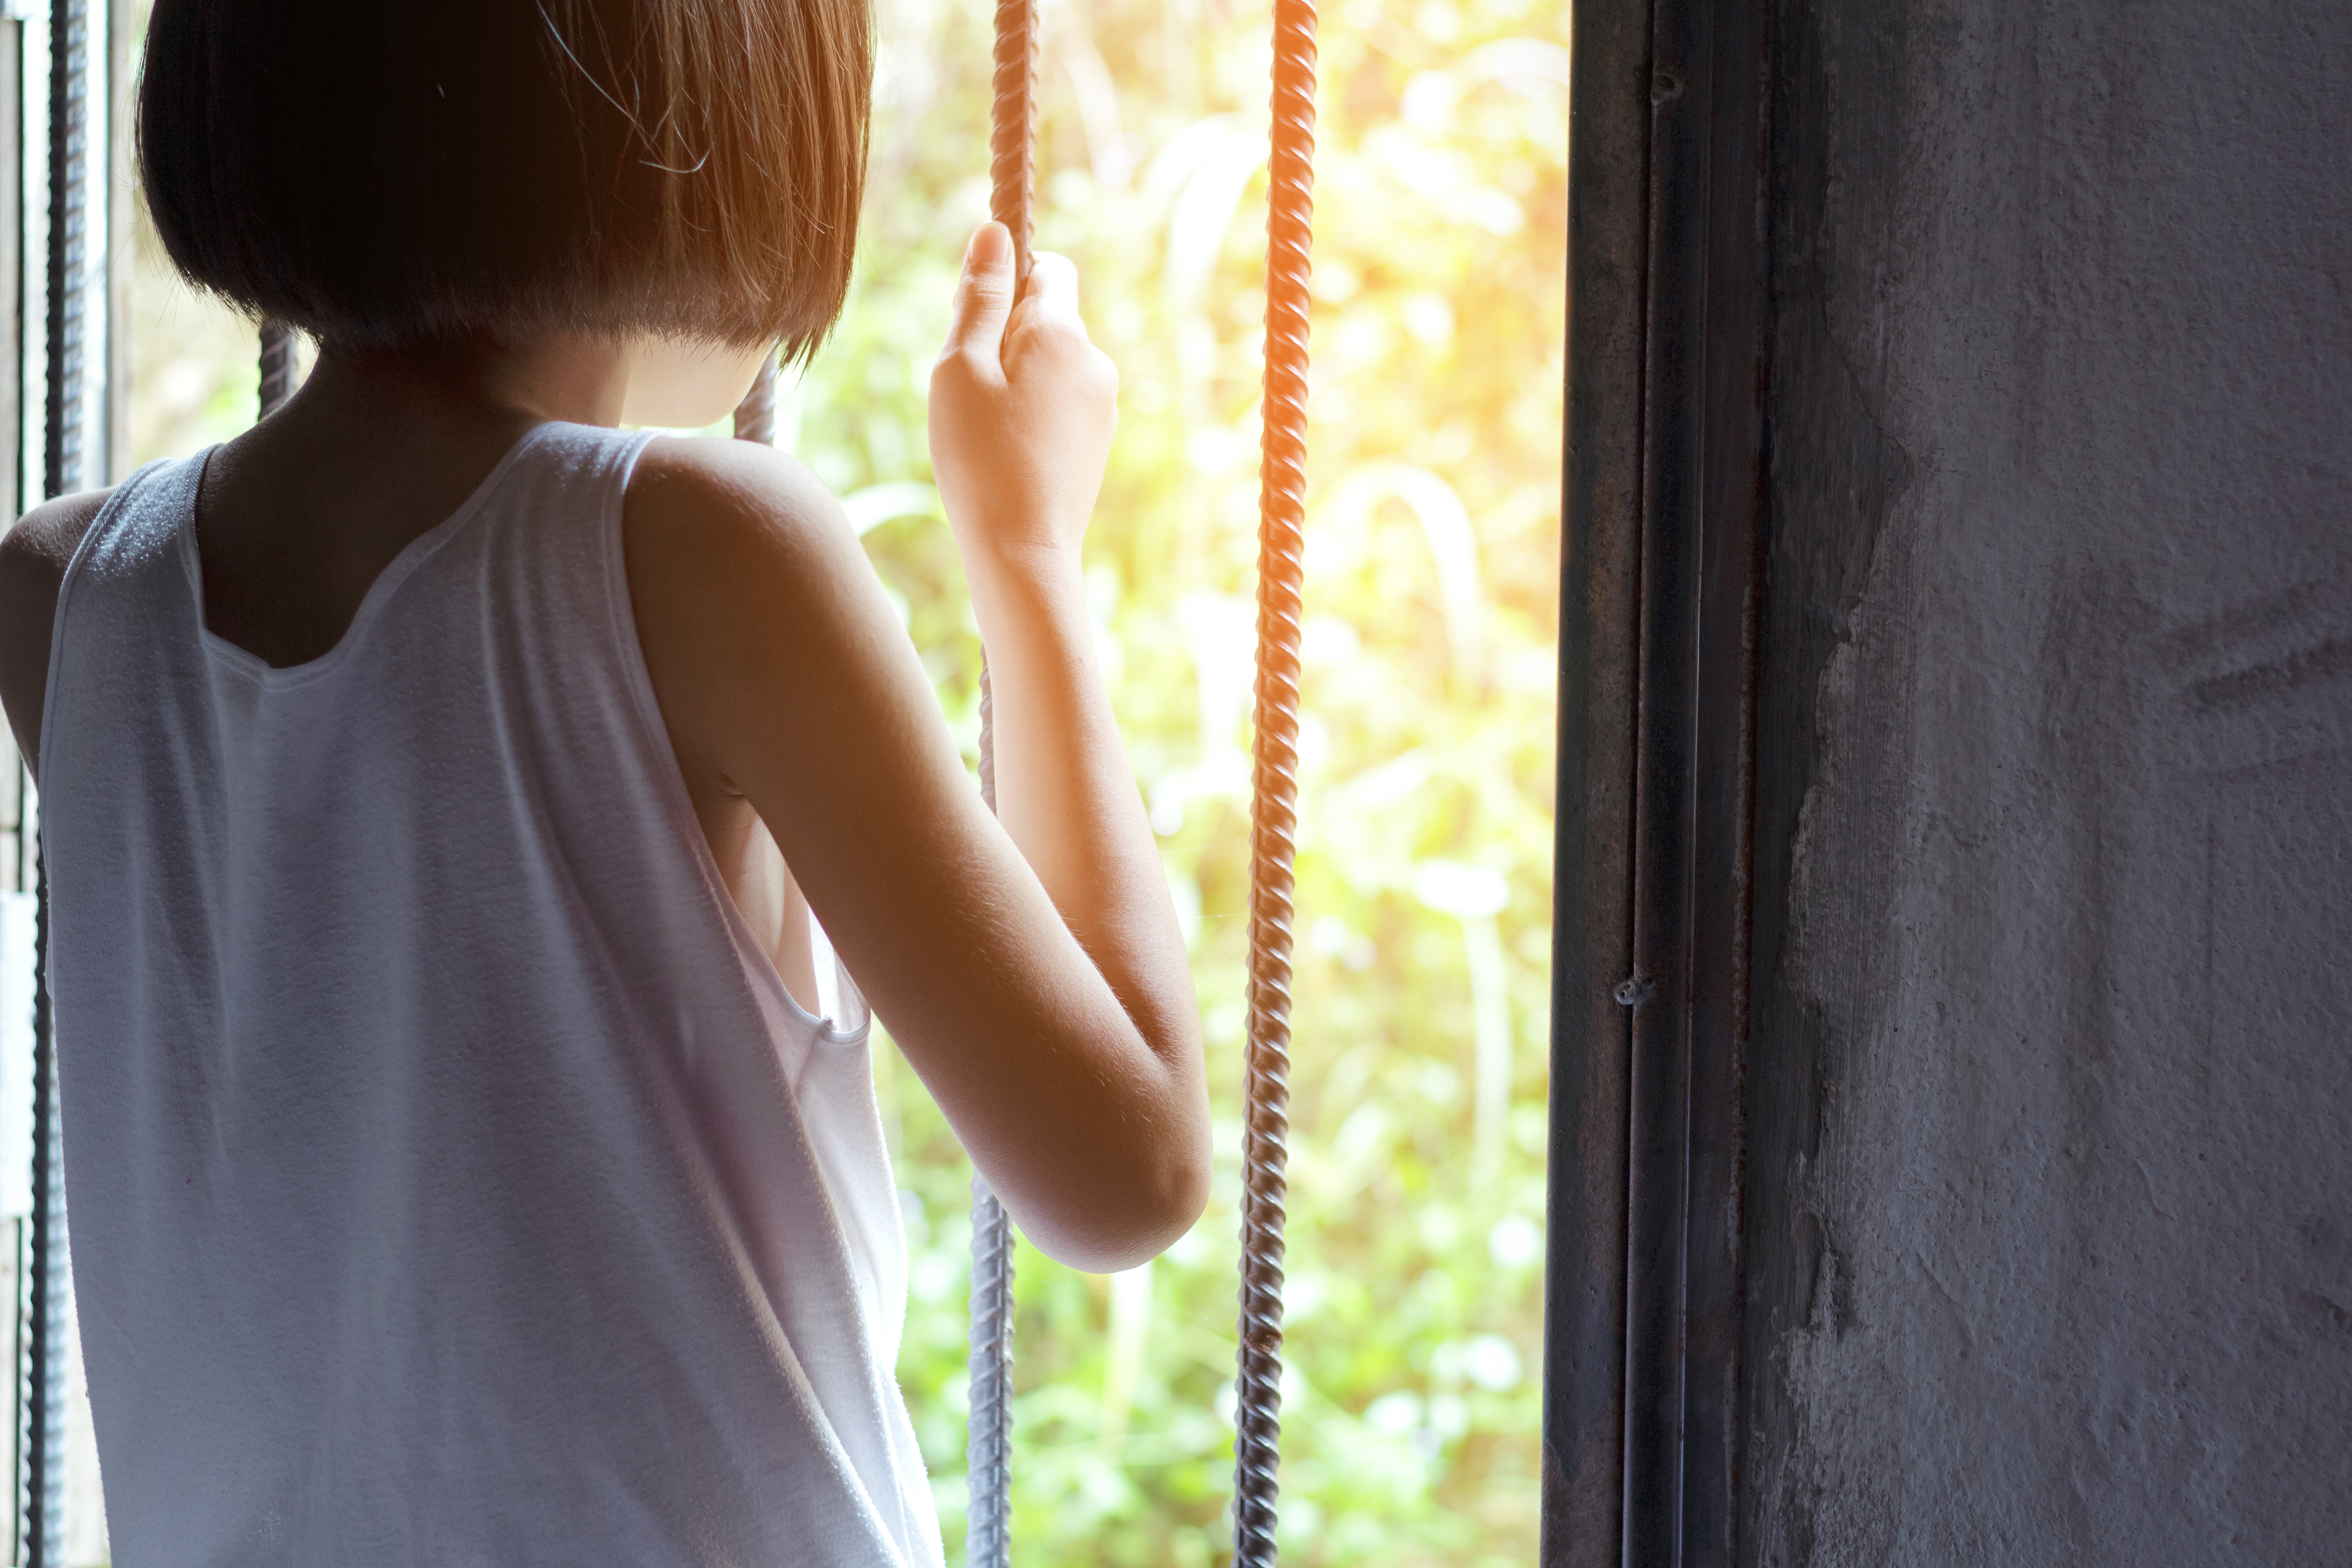 ACTION NEEDED: Support mandatory sentencing for prostituting children.